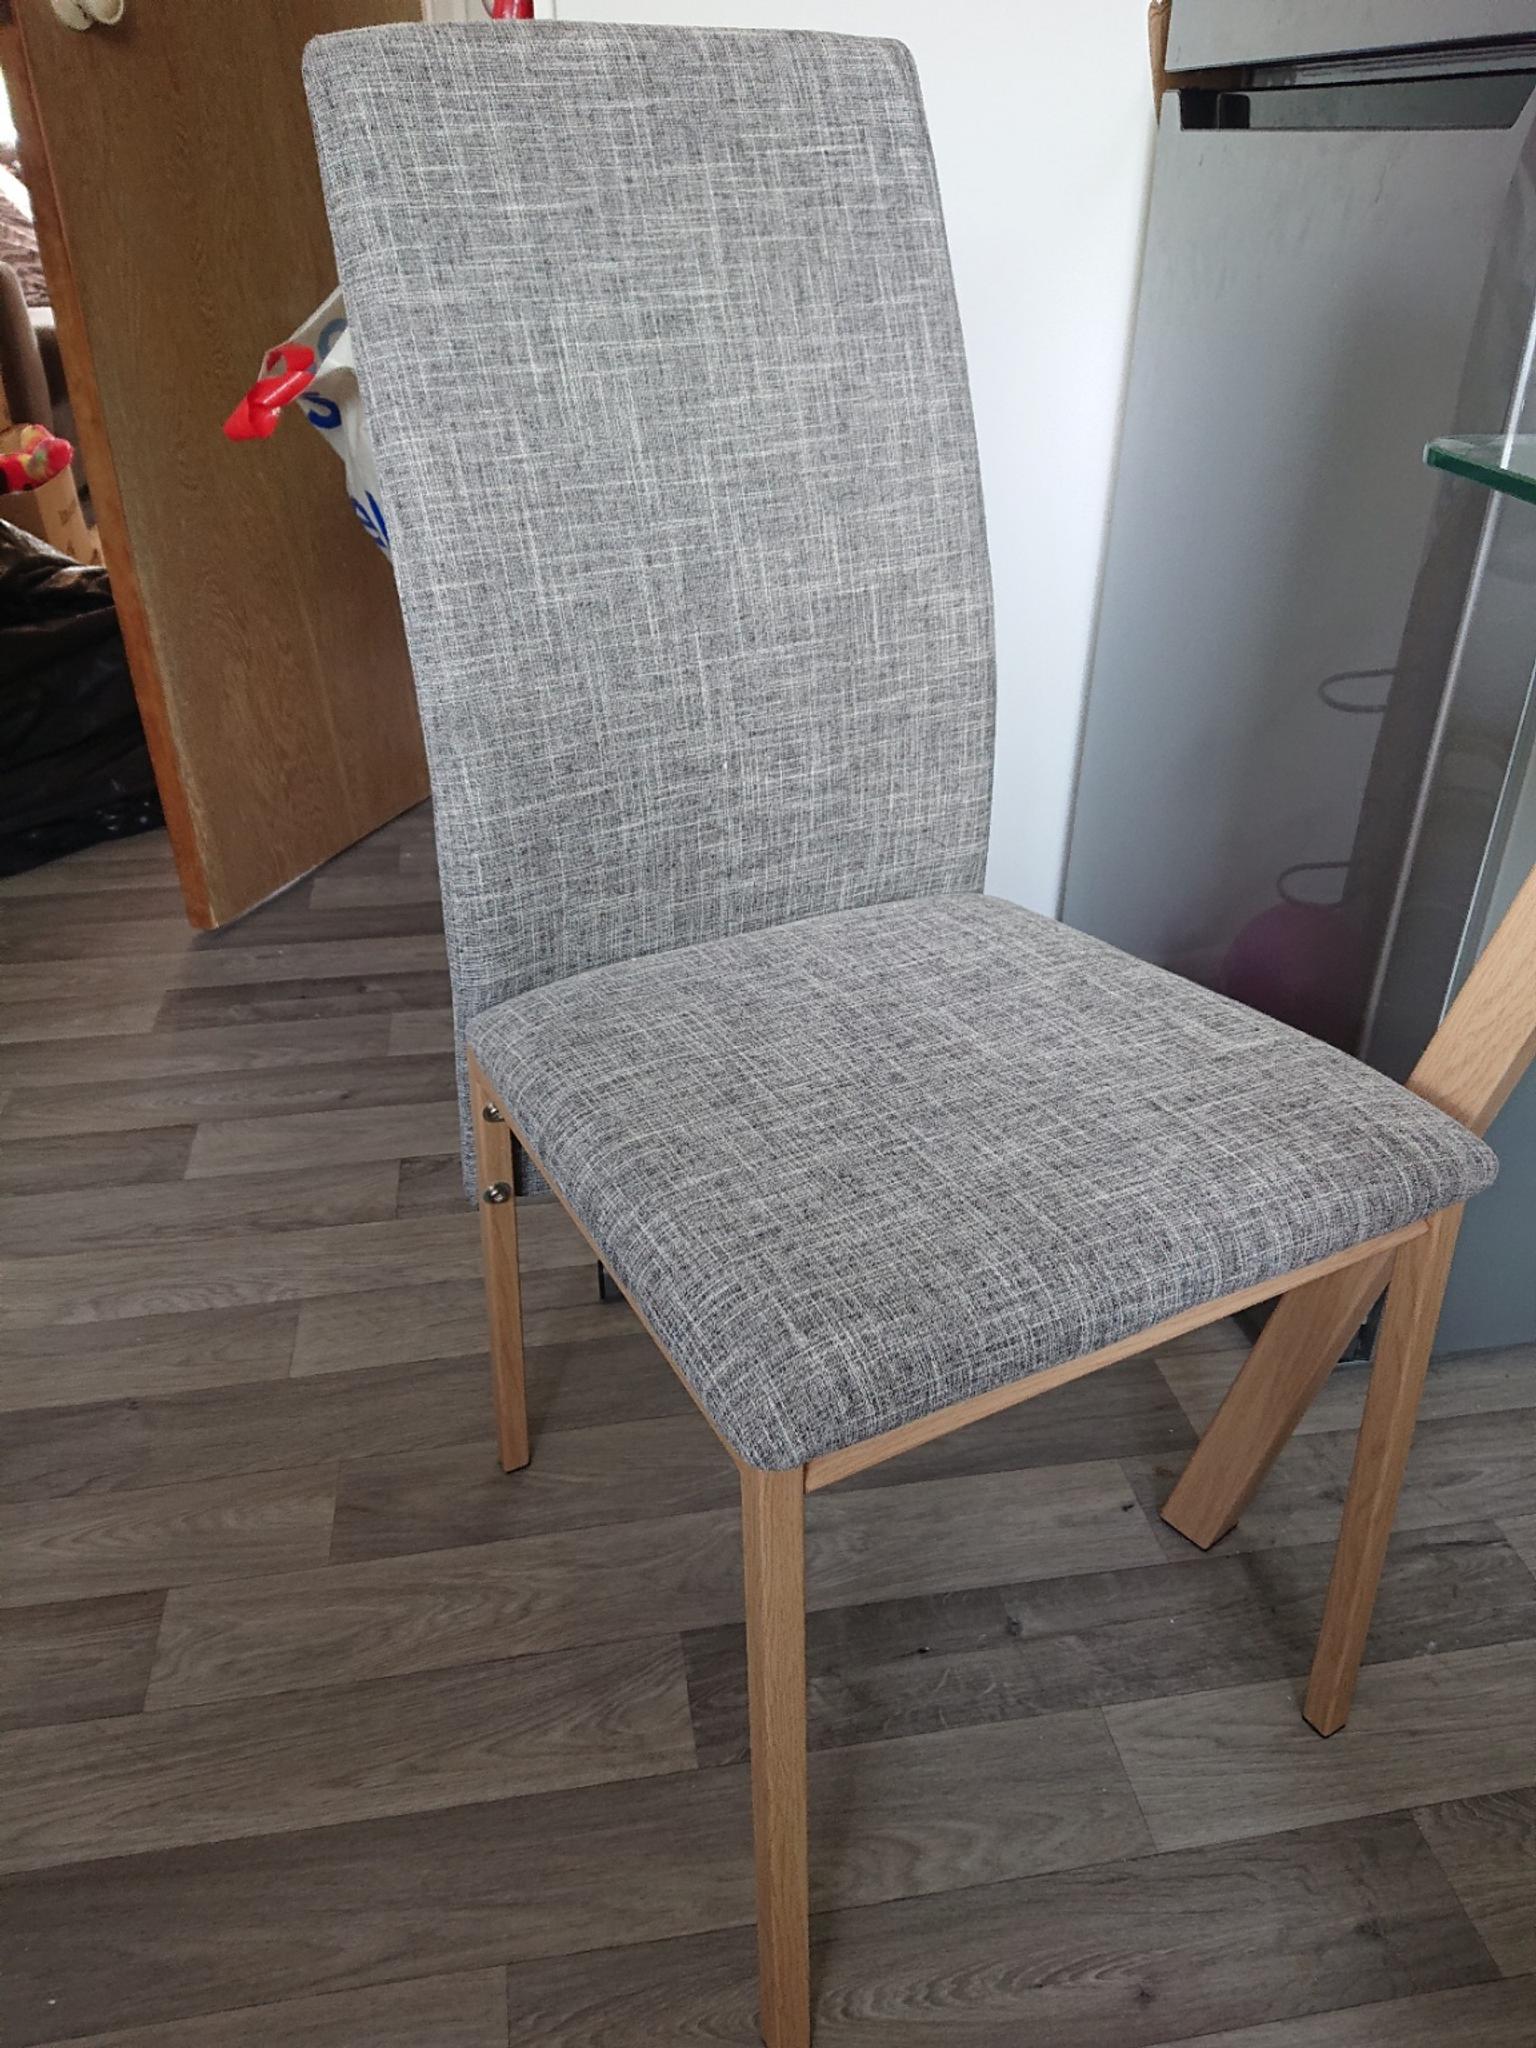 Dunelm Morton Dining Table And Chairs Set In Pe7 Huntingdonshire For 90 00 For Sale Shpock